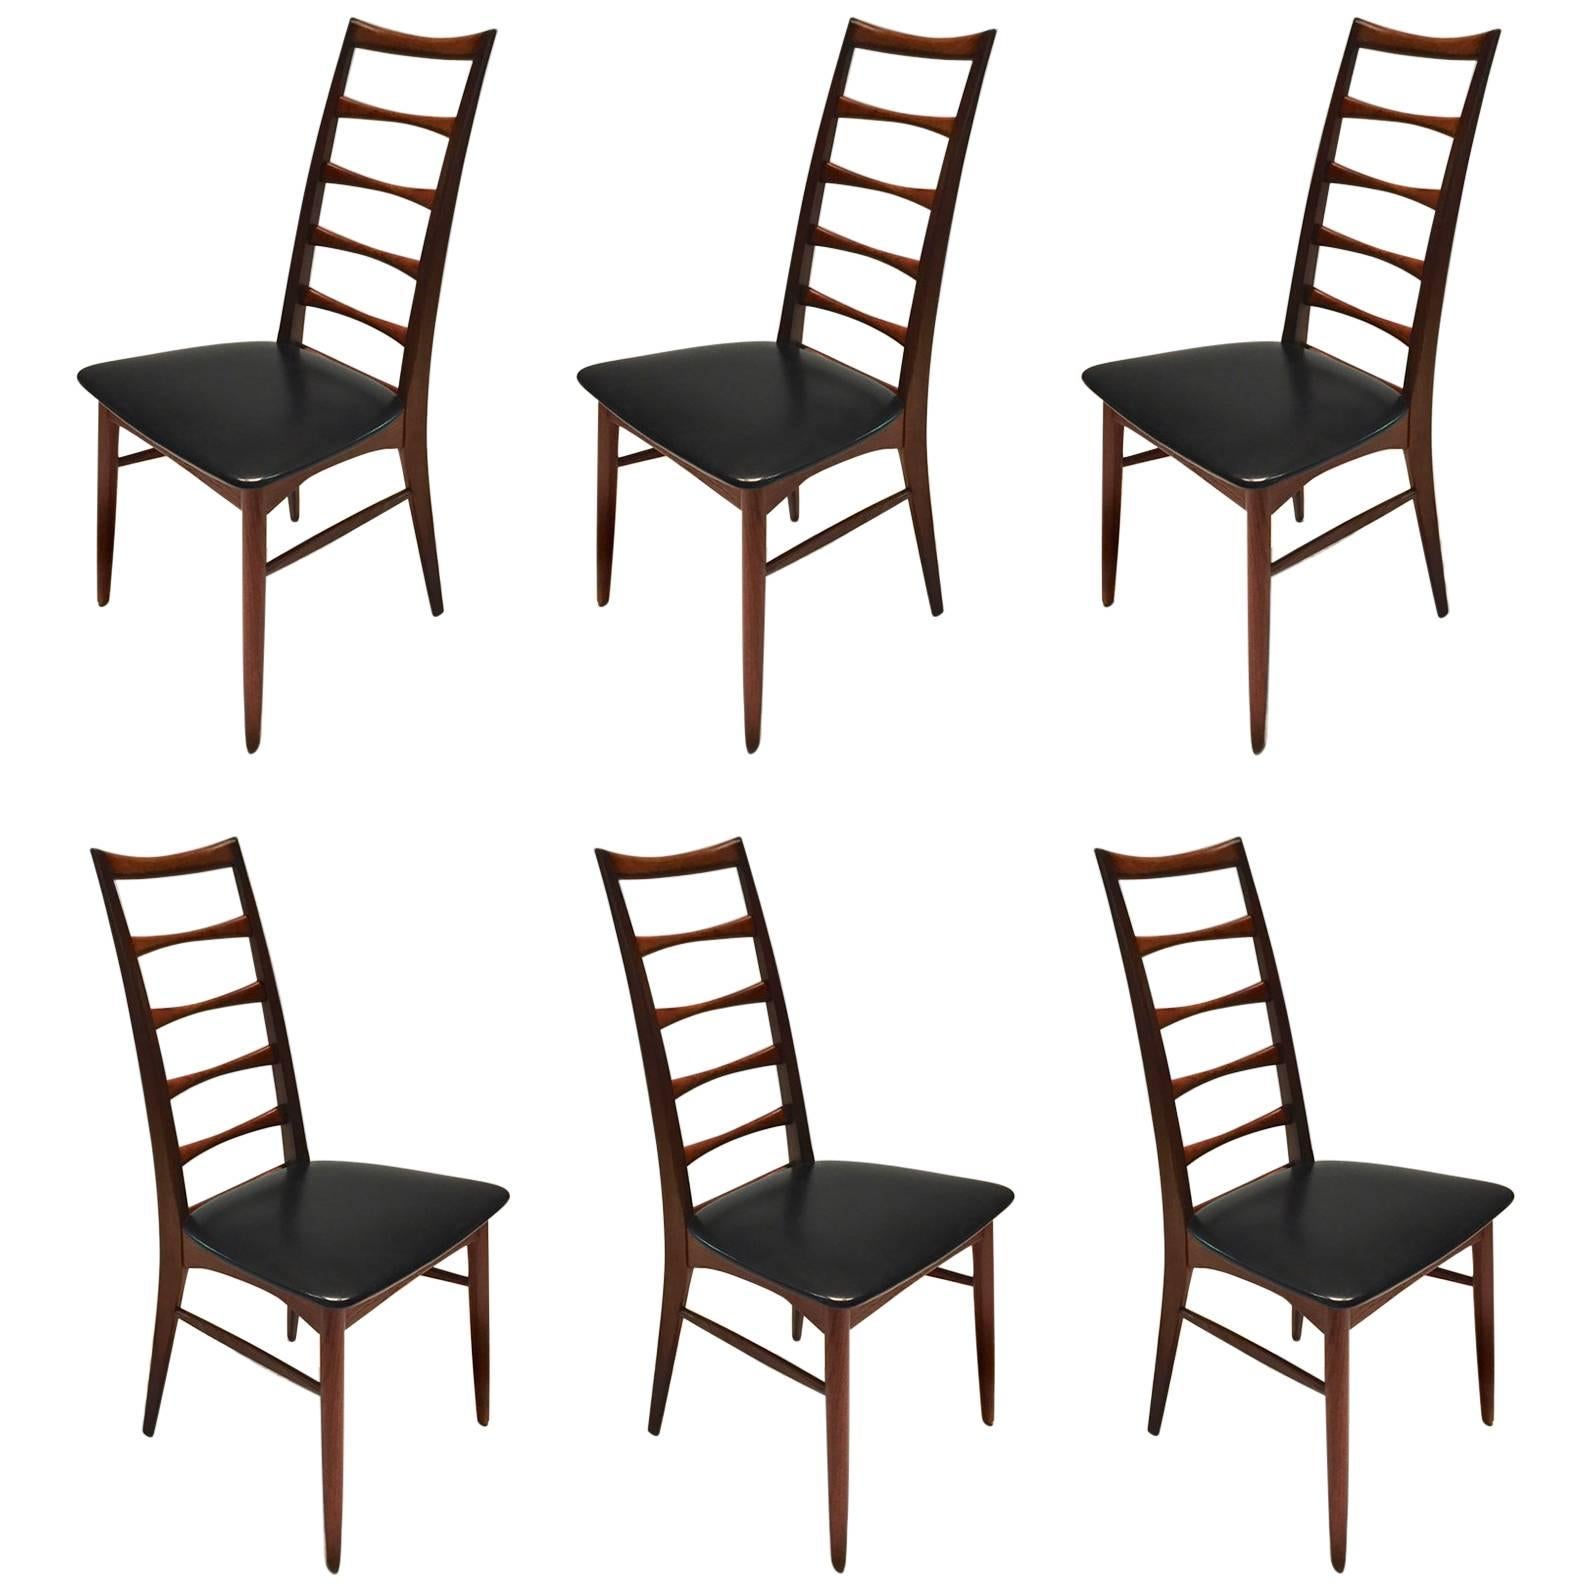 Six Lis Dining Chairs by Niels Koefoed, Denmark, circa 1965